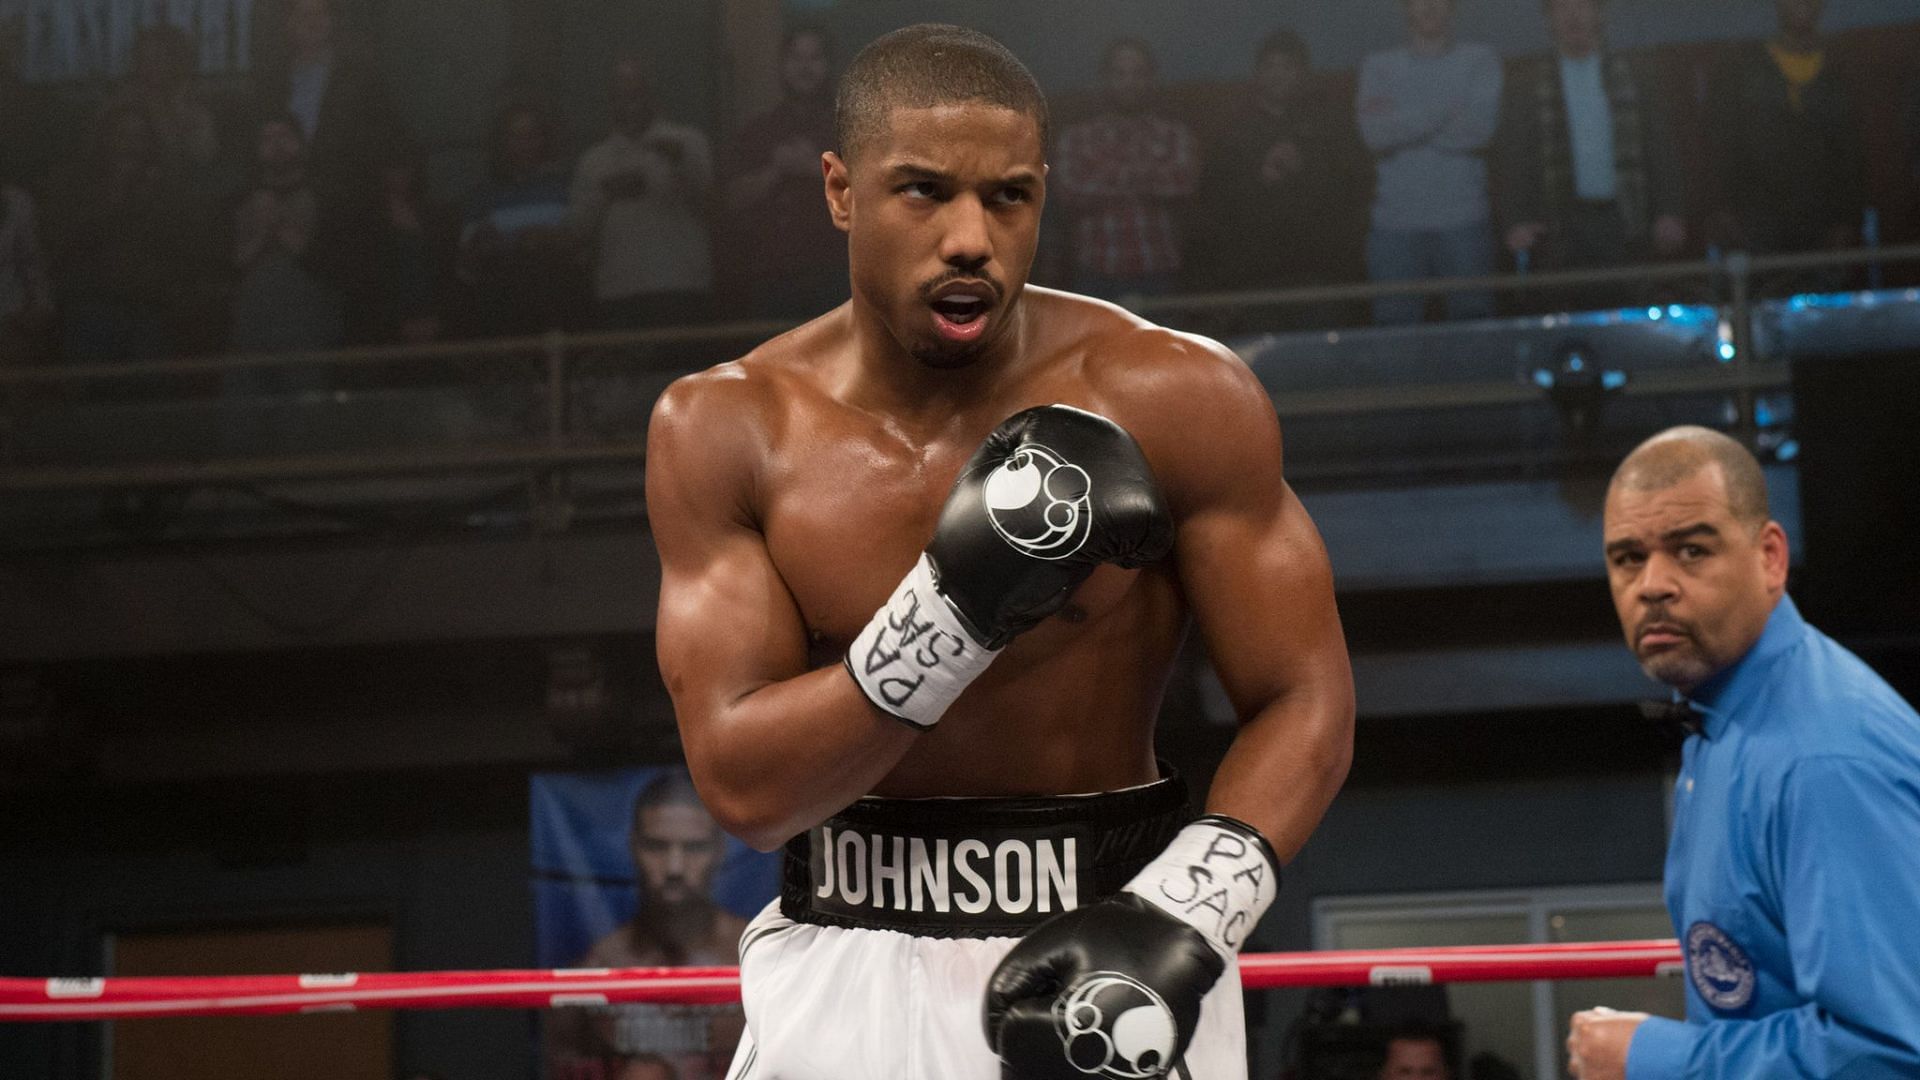 The Rocky &amp; Creed Universe Grows: Mapping out new rings of storytelling in film and TV (Image via MGM)